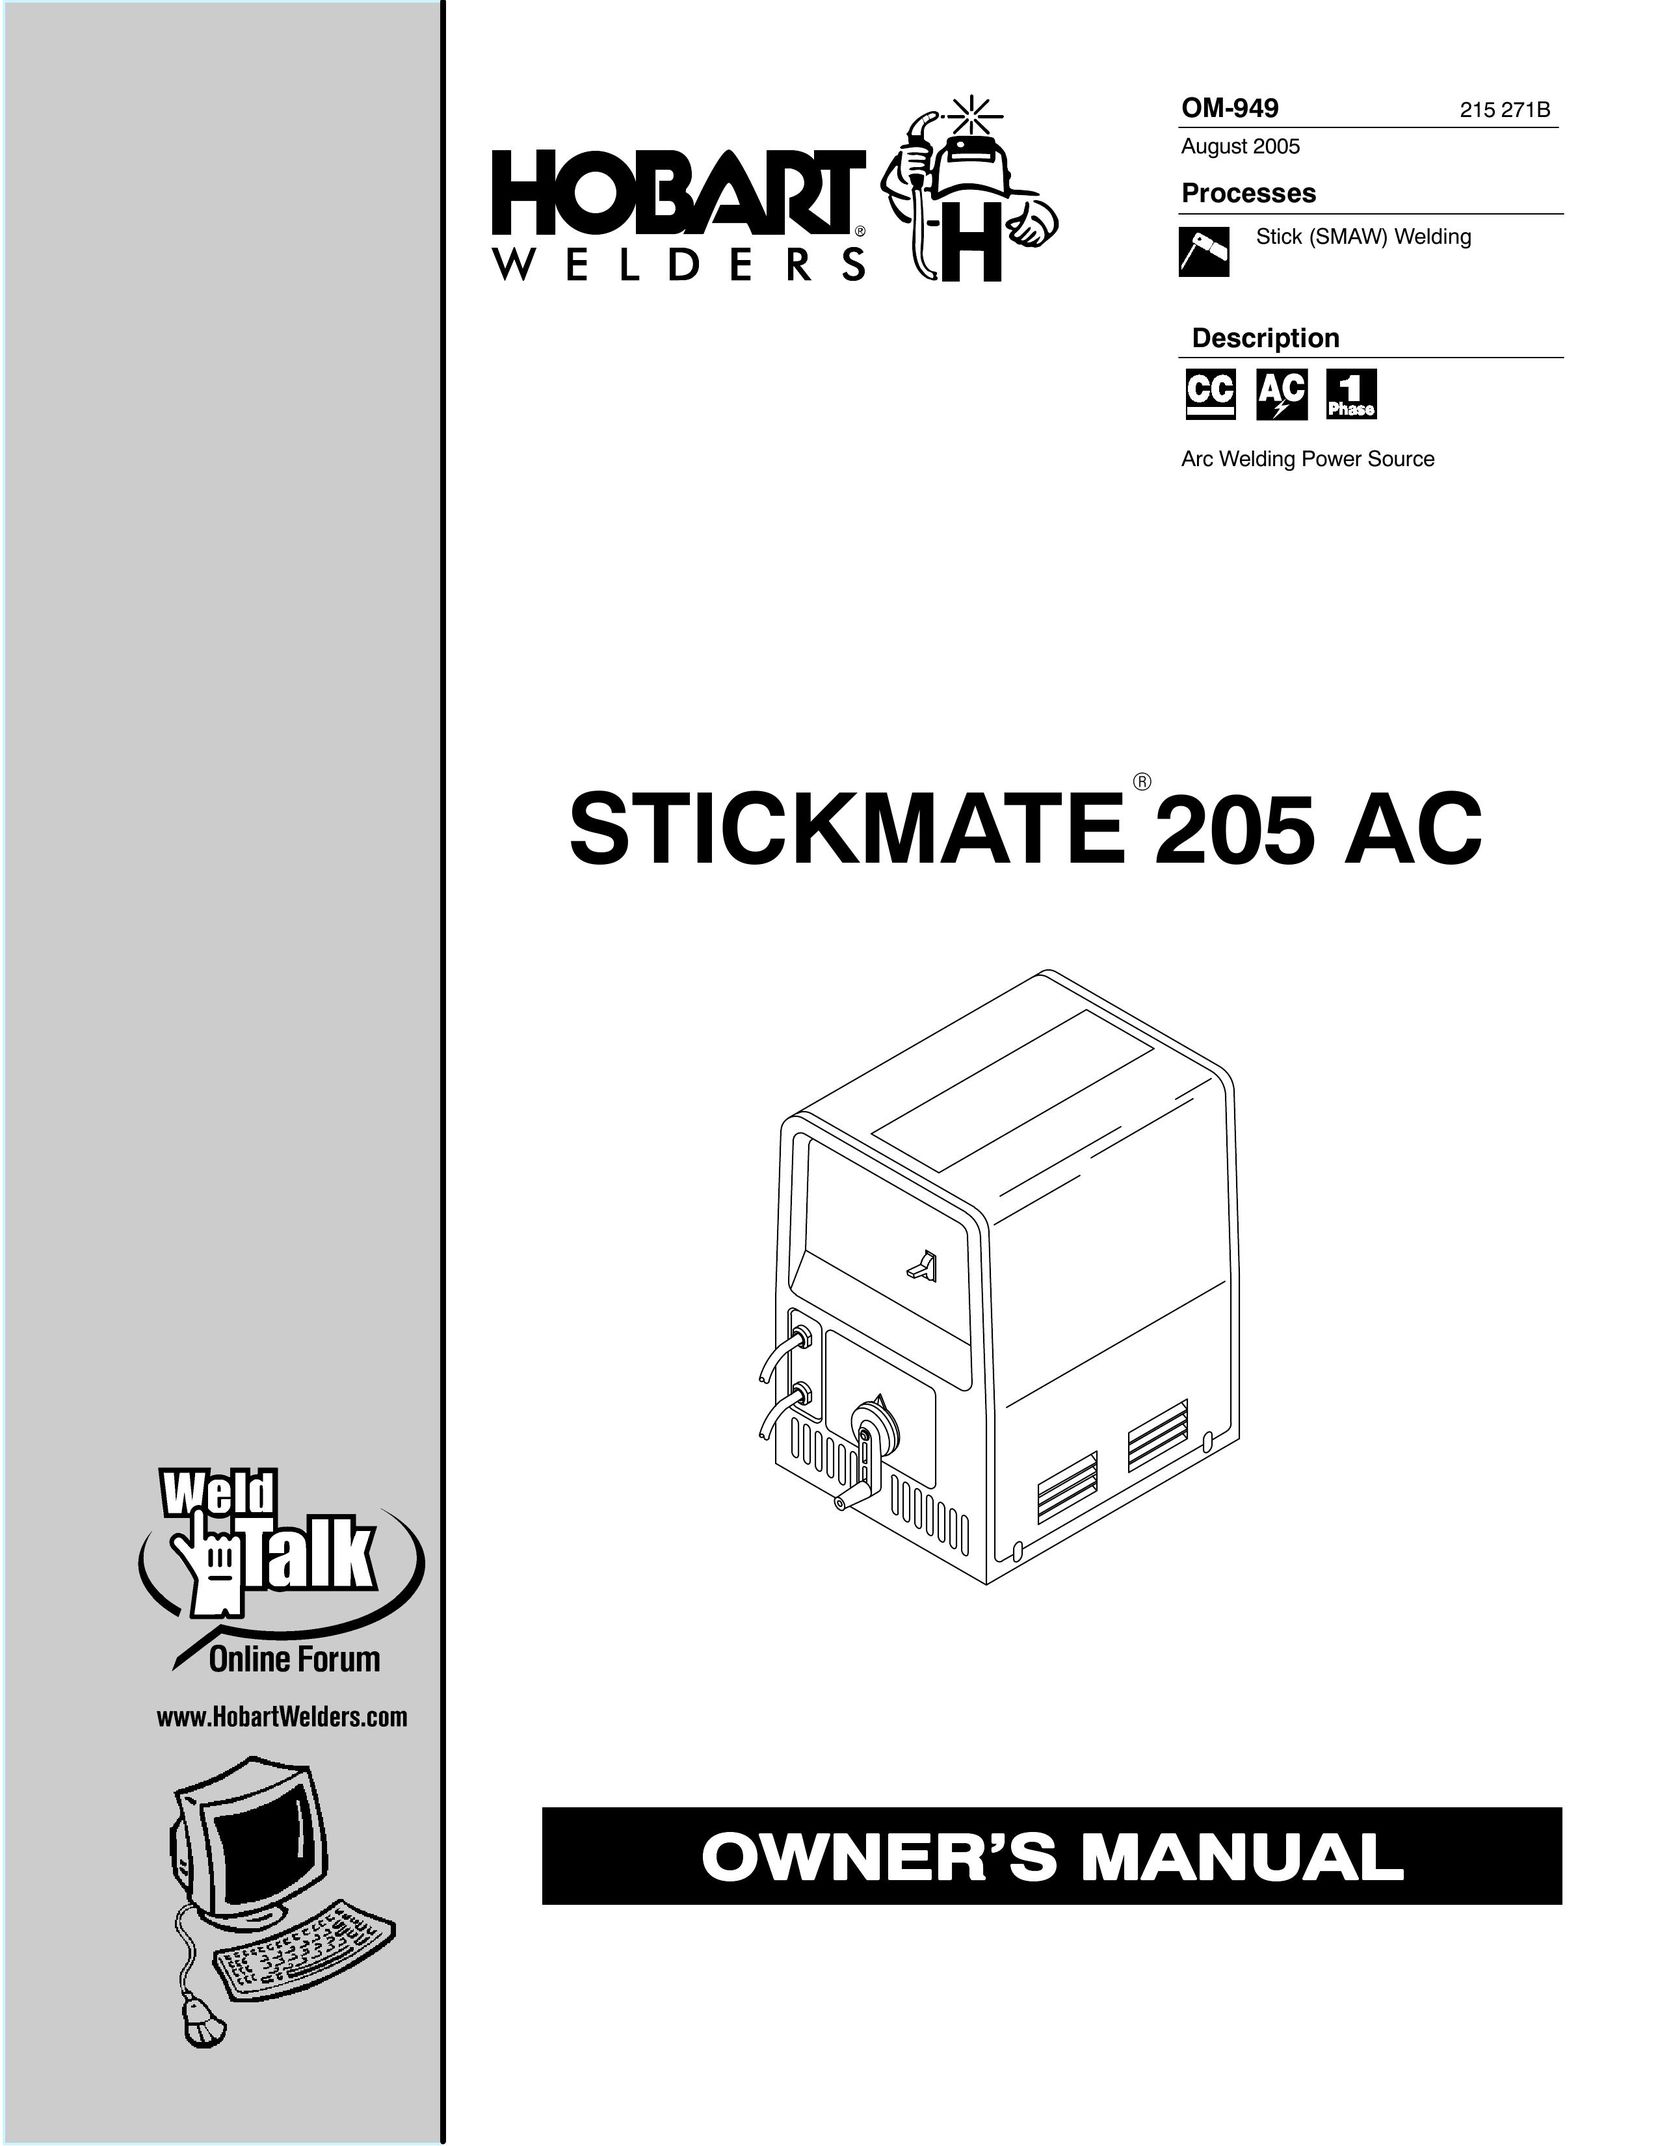 Hobart Welding Products OM-949 Welding System User Manual